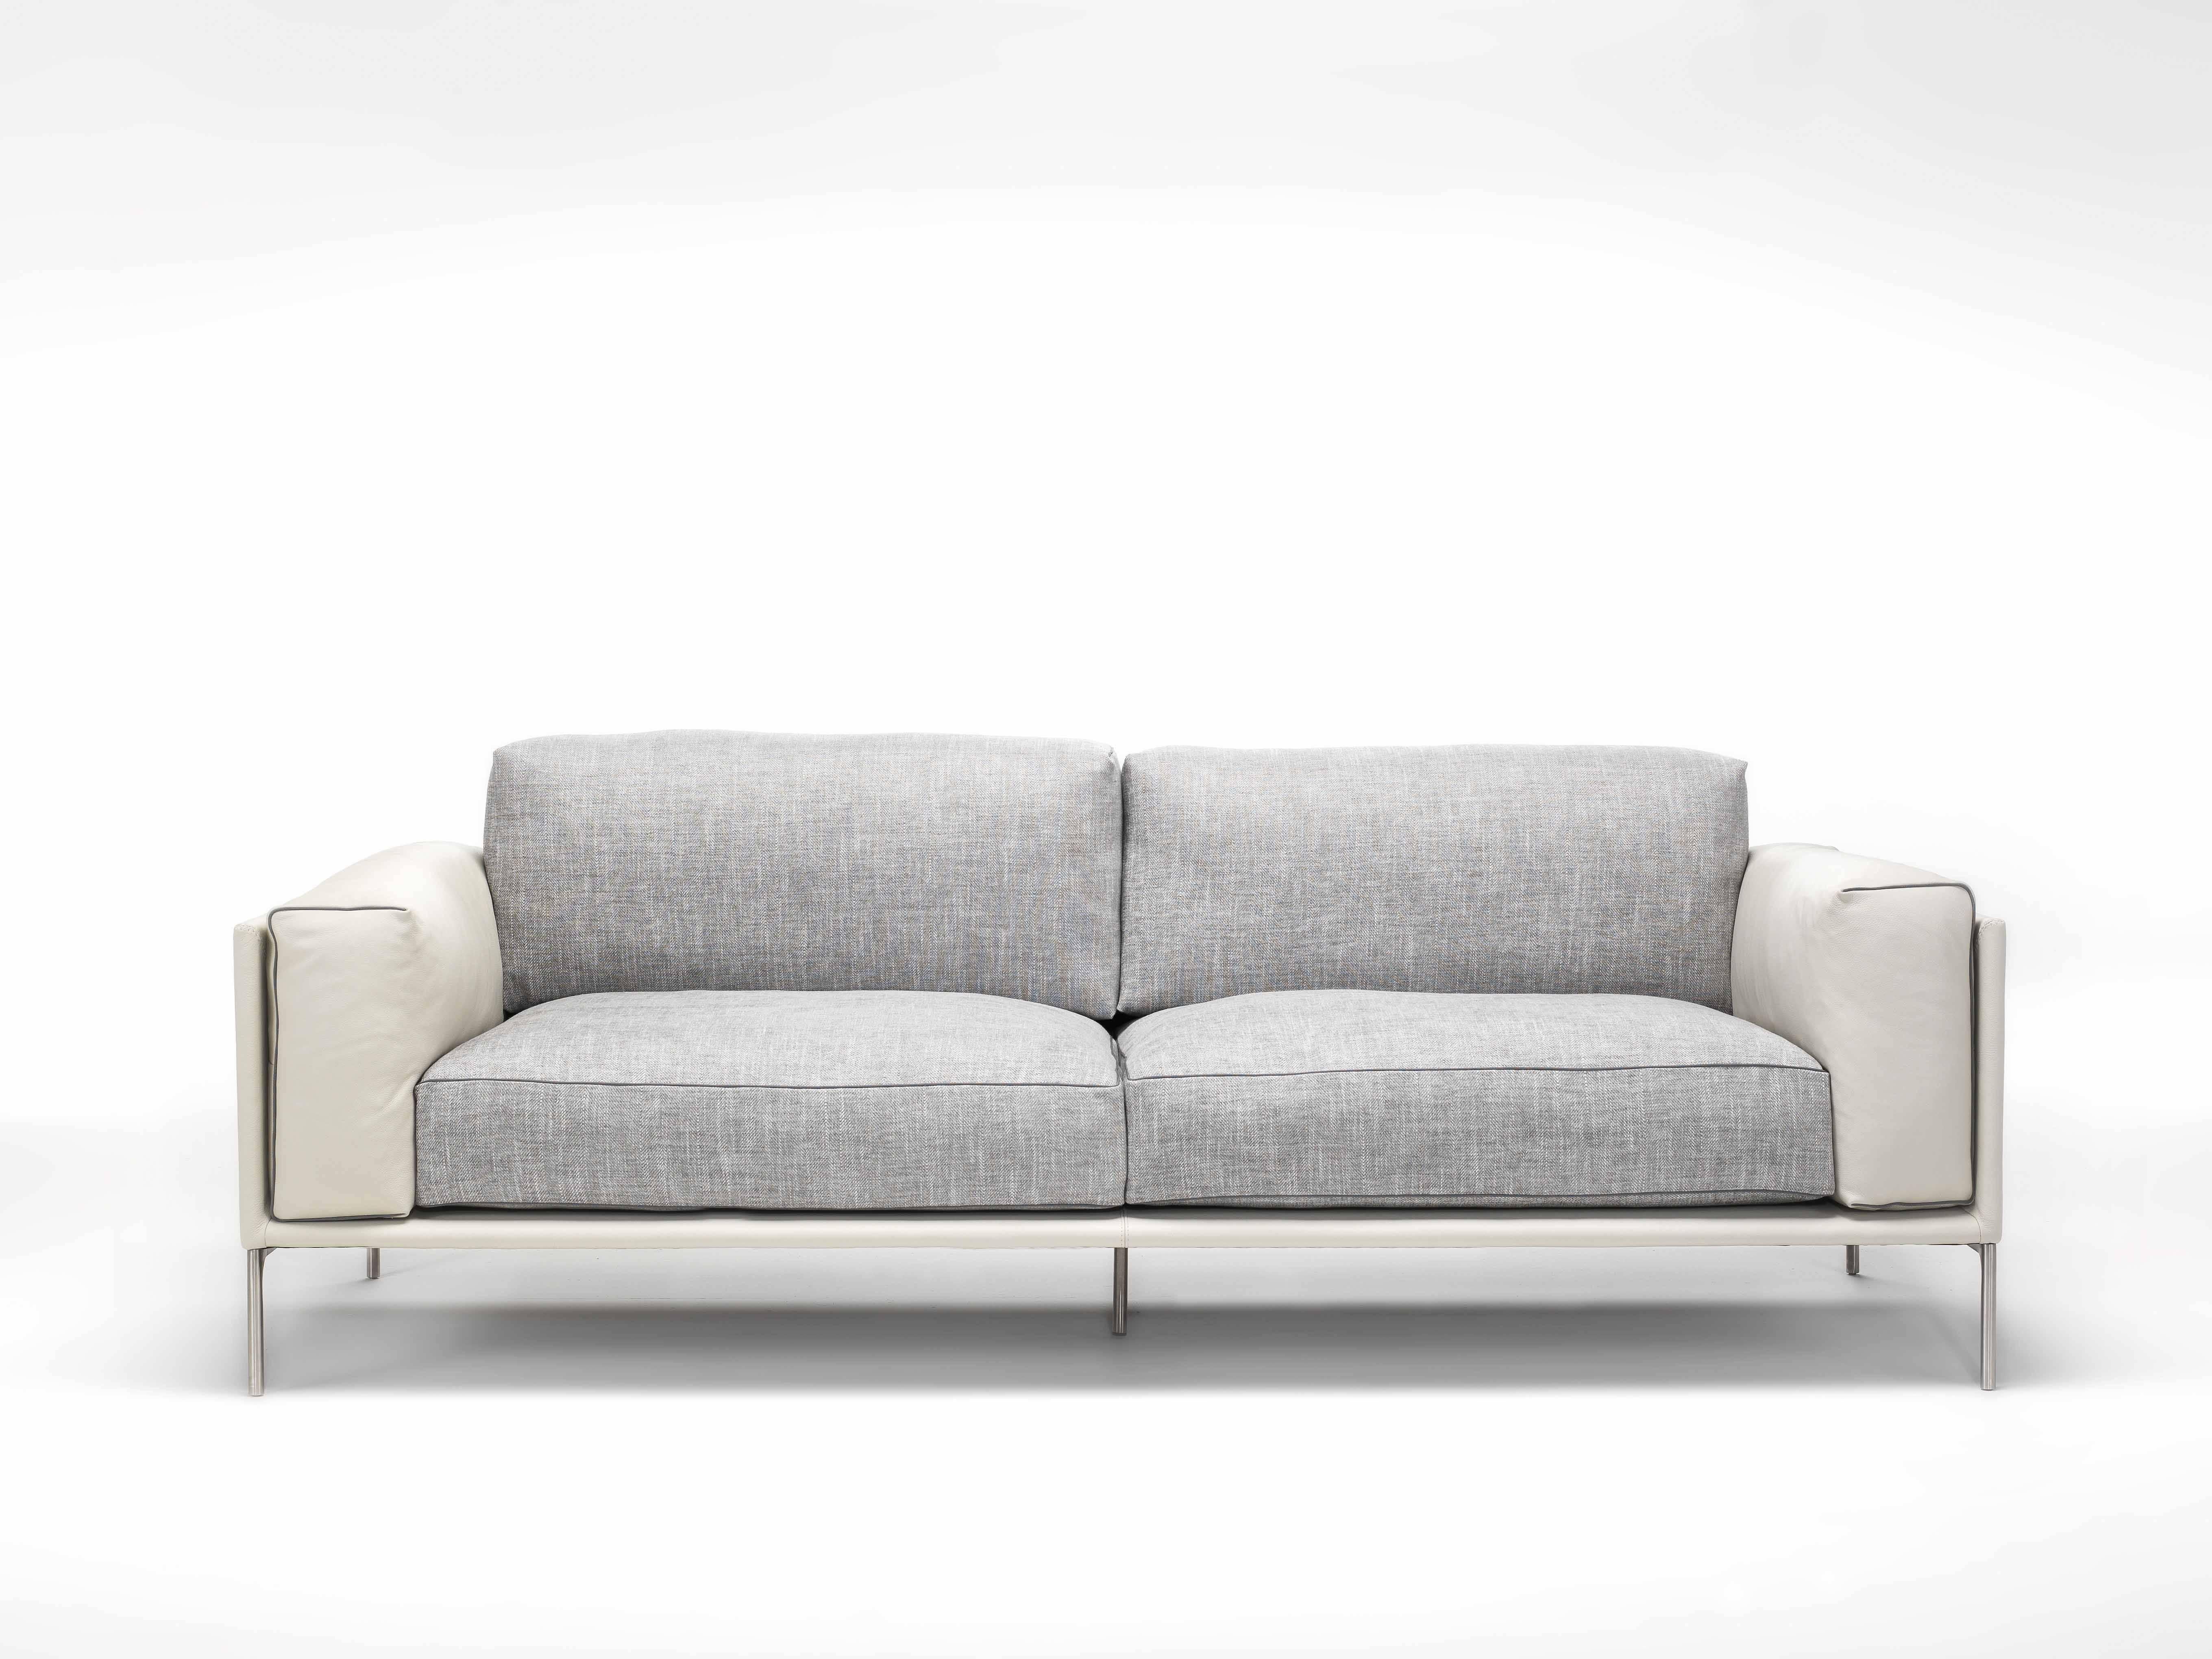 Giorgio sofa in ivory and gray by Amura Lab.